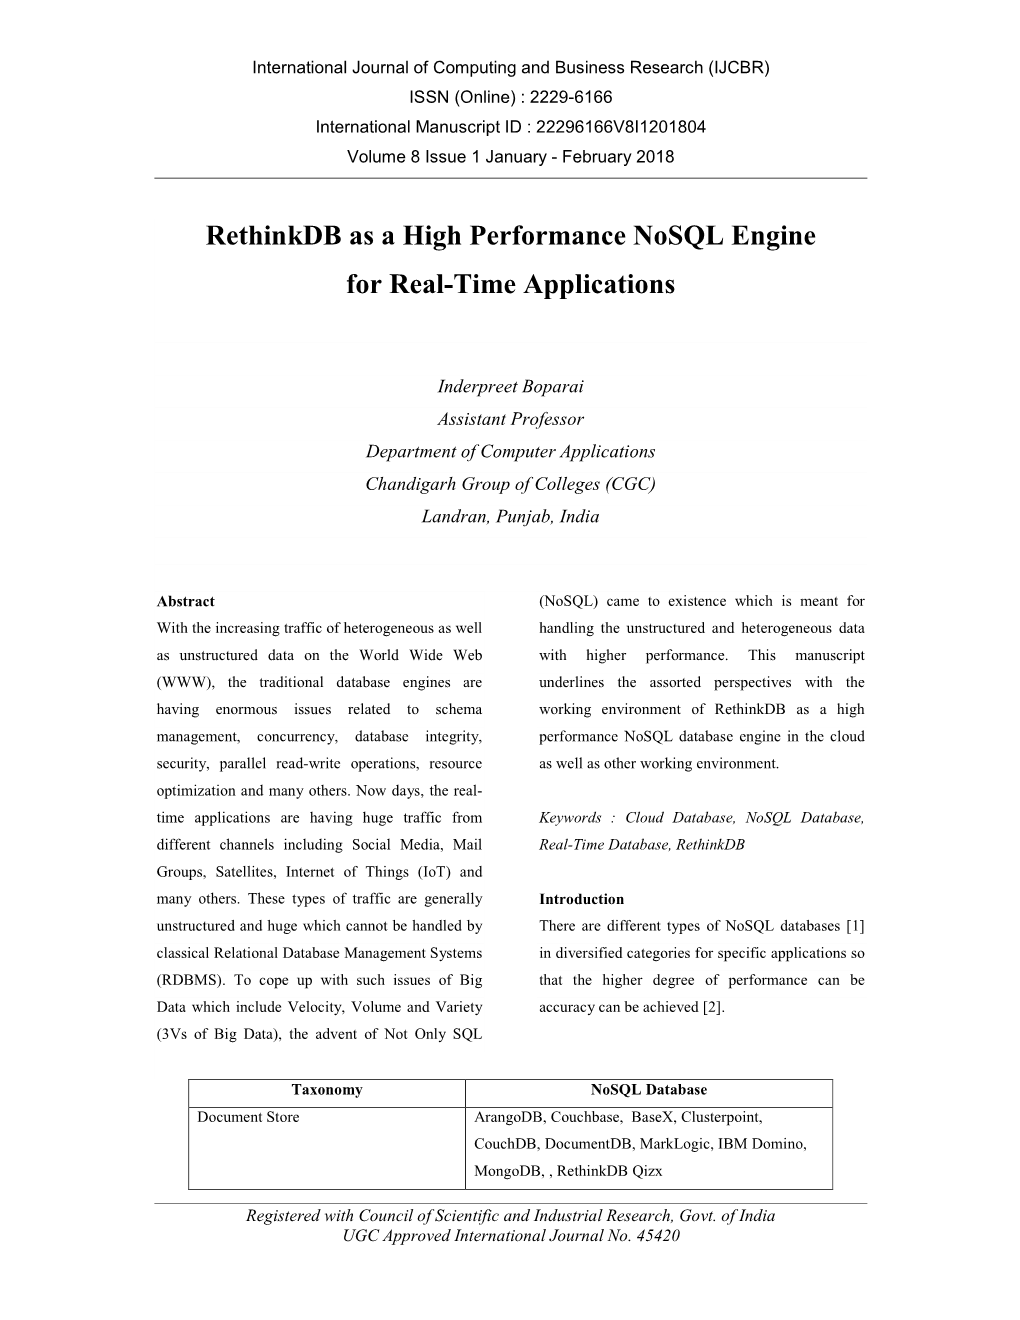 Rethinkdb As a High Performance Nosql Engine for Real-Time Applications